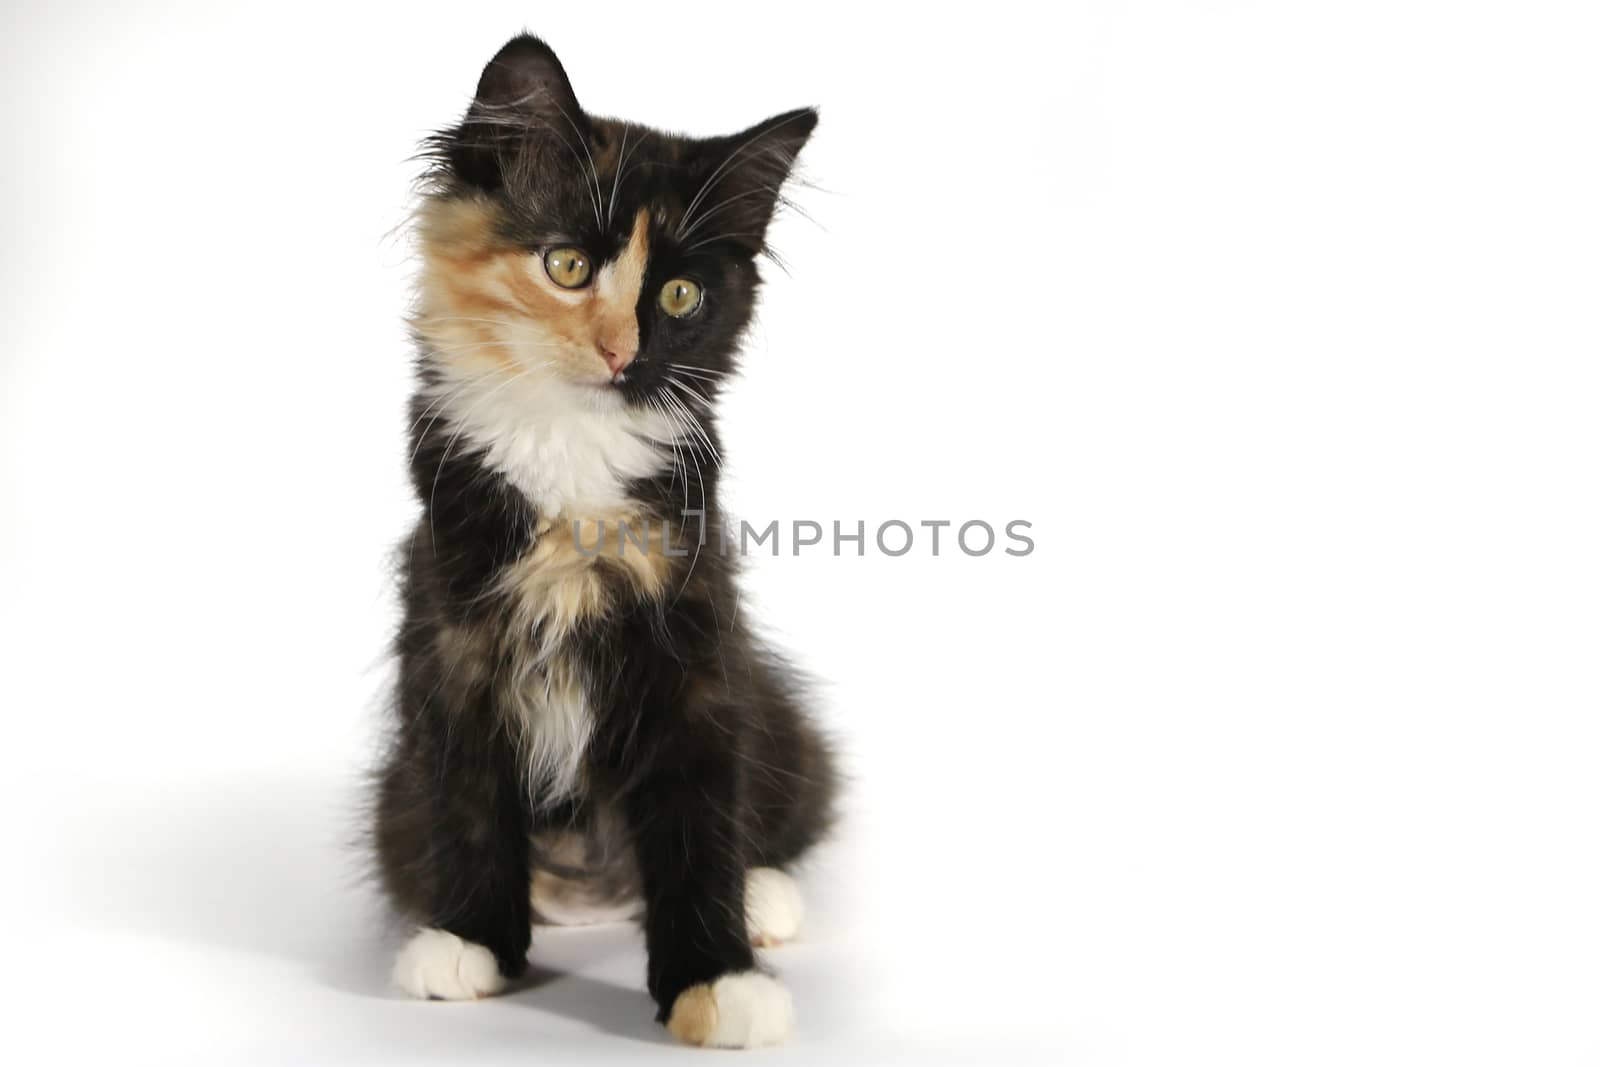 Adorable Long Haired Domestic Kitten With a Split Face by tobkatrina